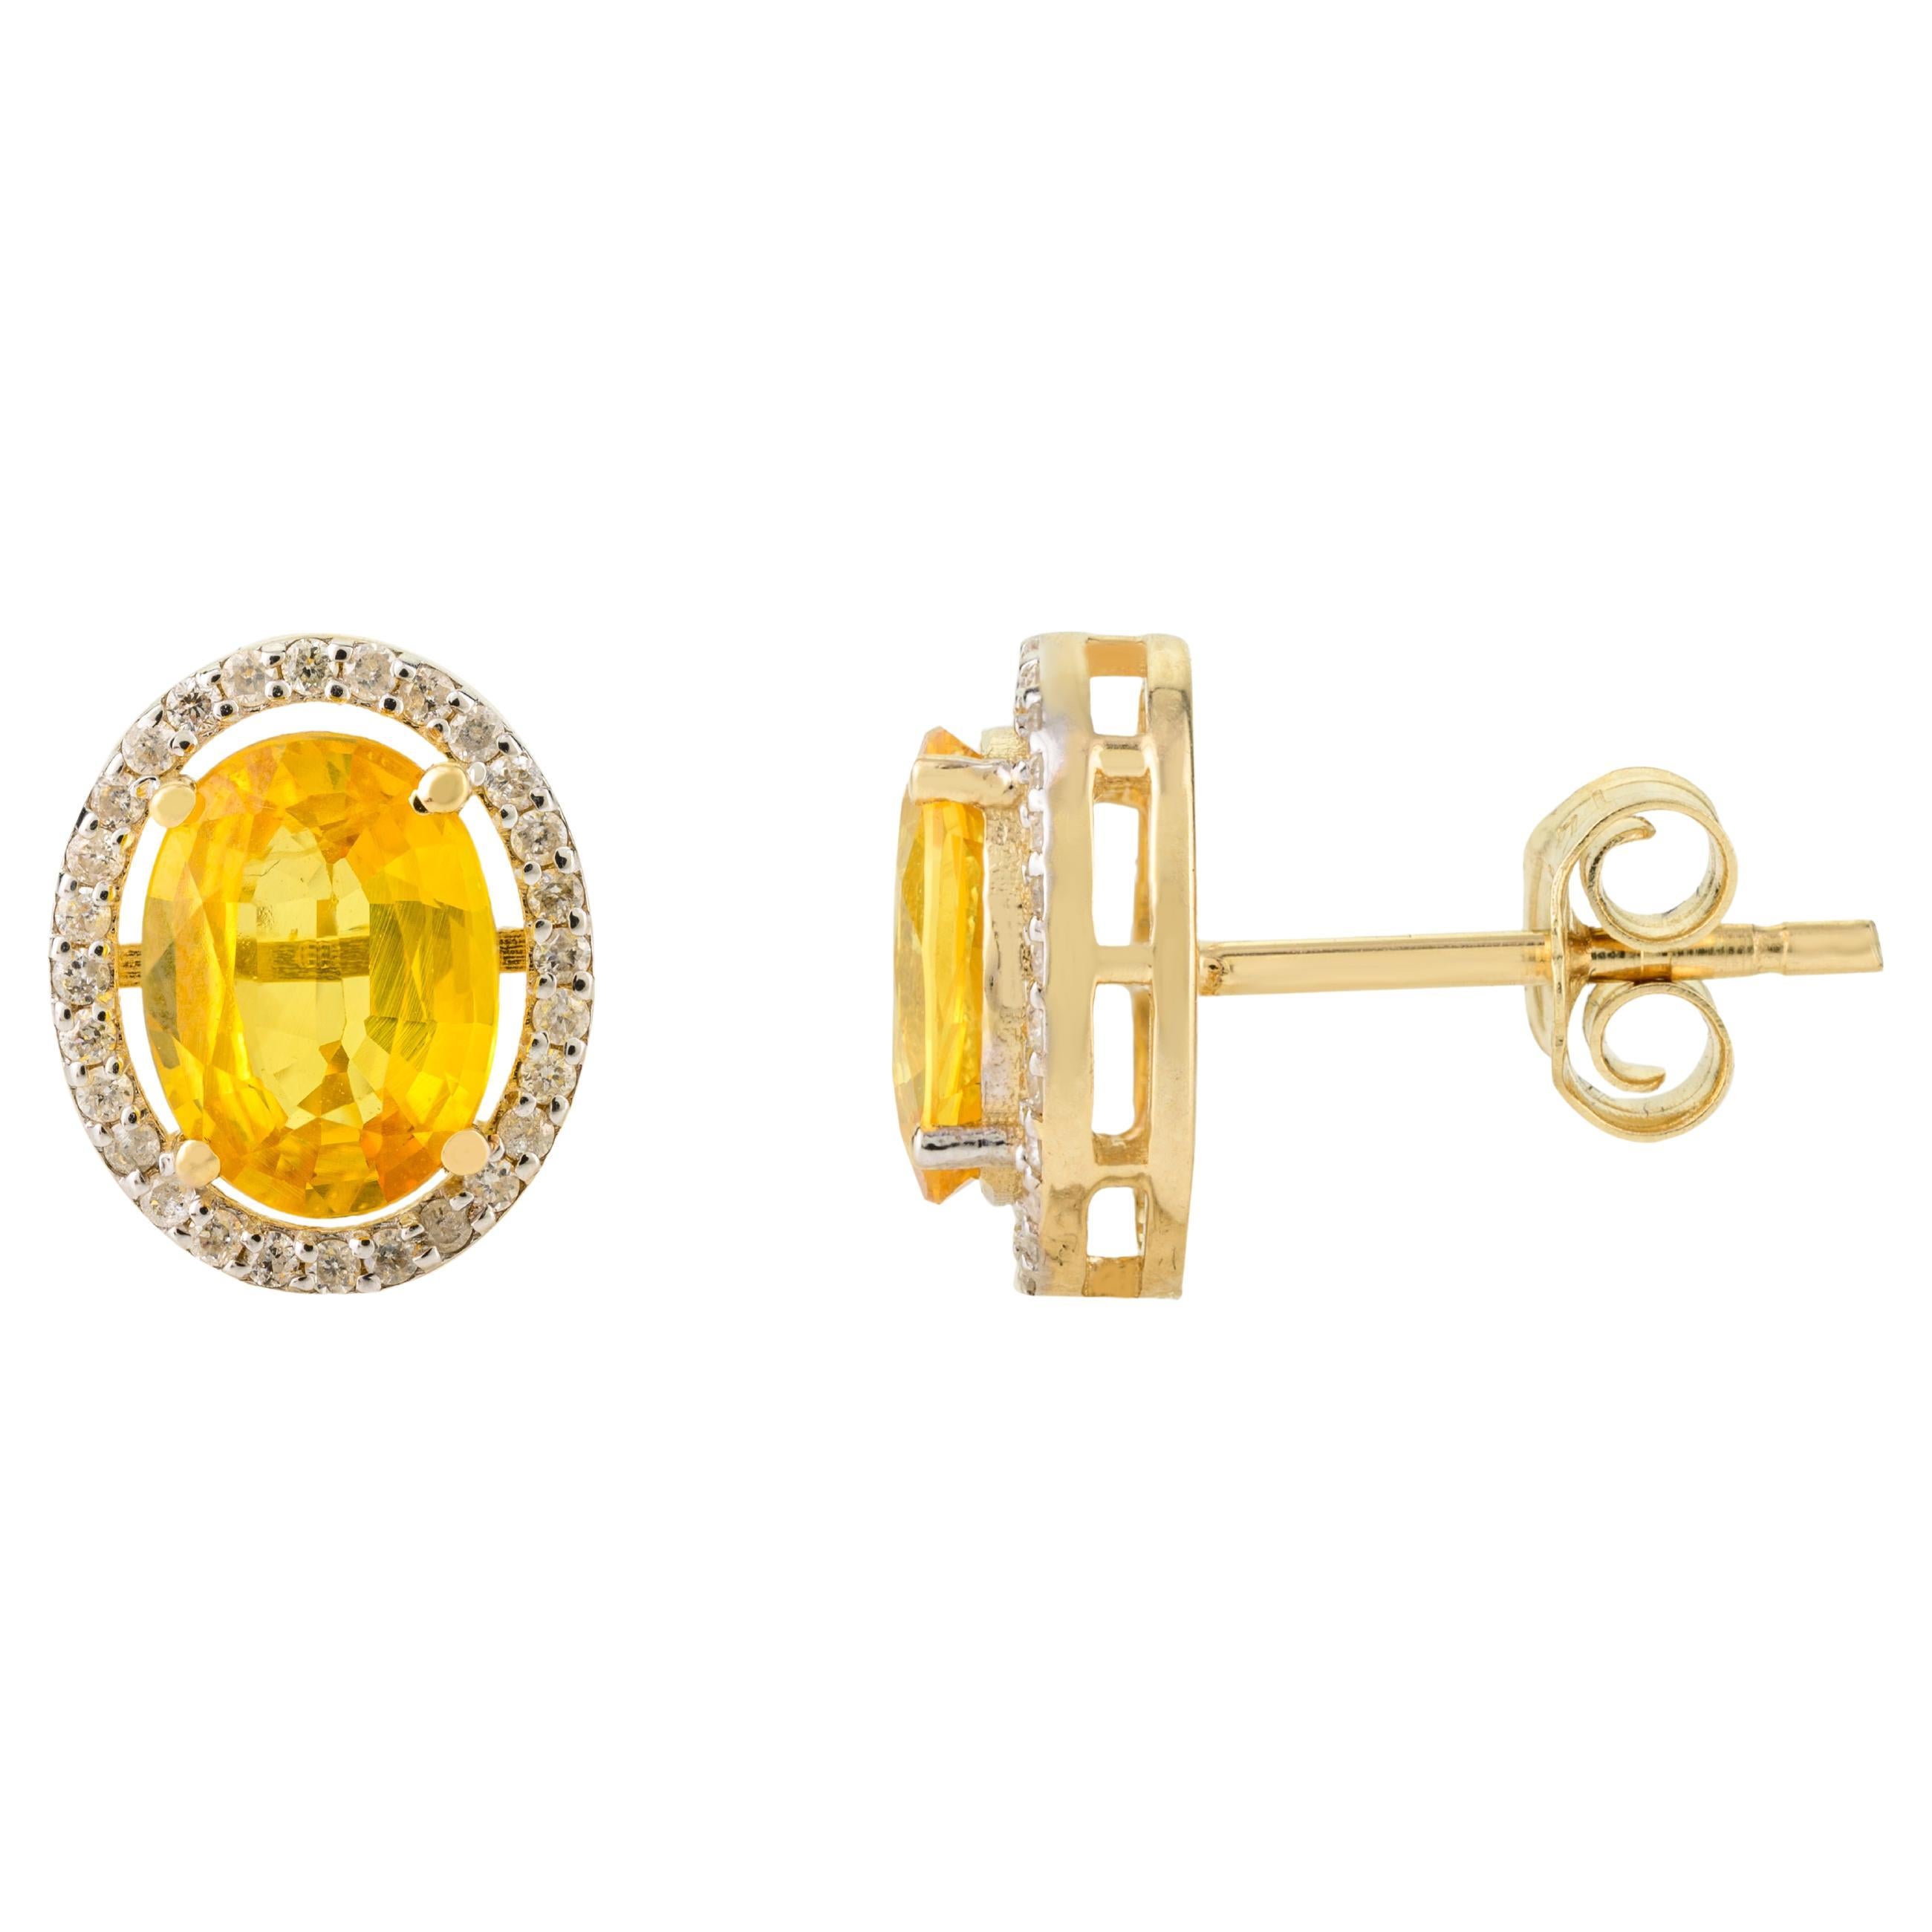 Oval Yellow Sapphire Diamond Halo Everyday Studs in 14k Yellow Gold for Her